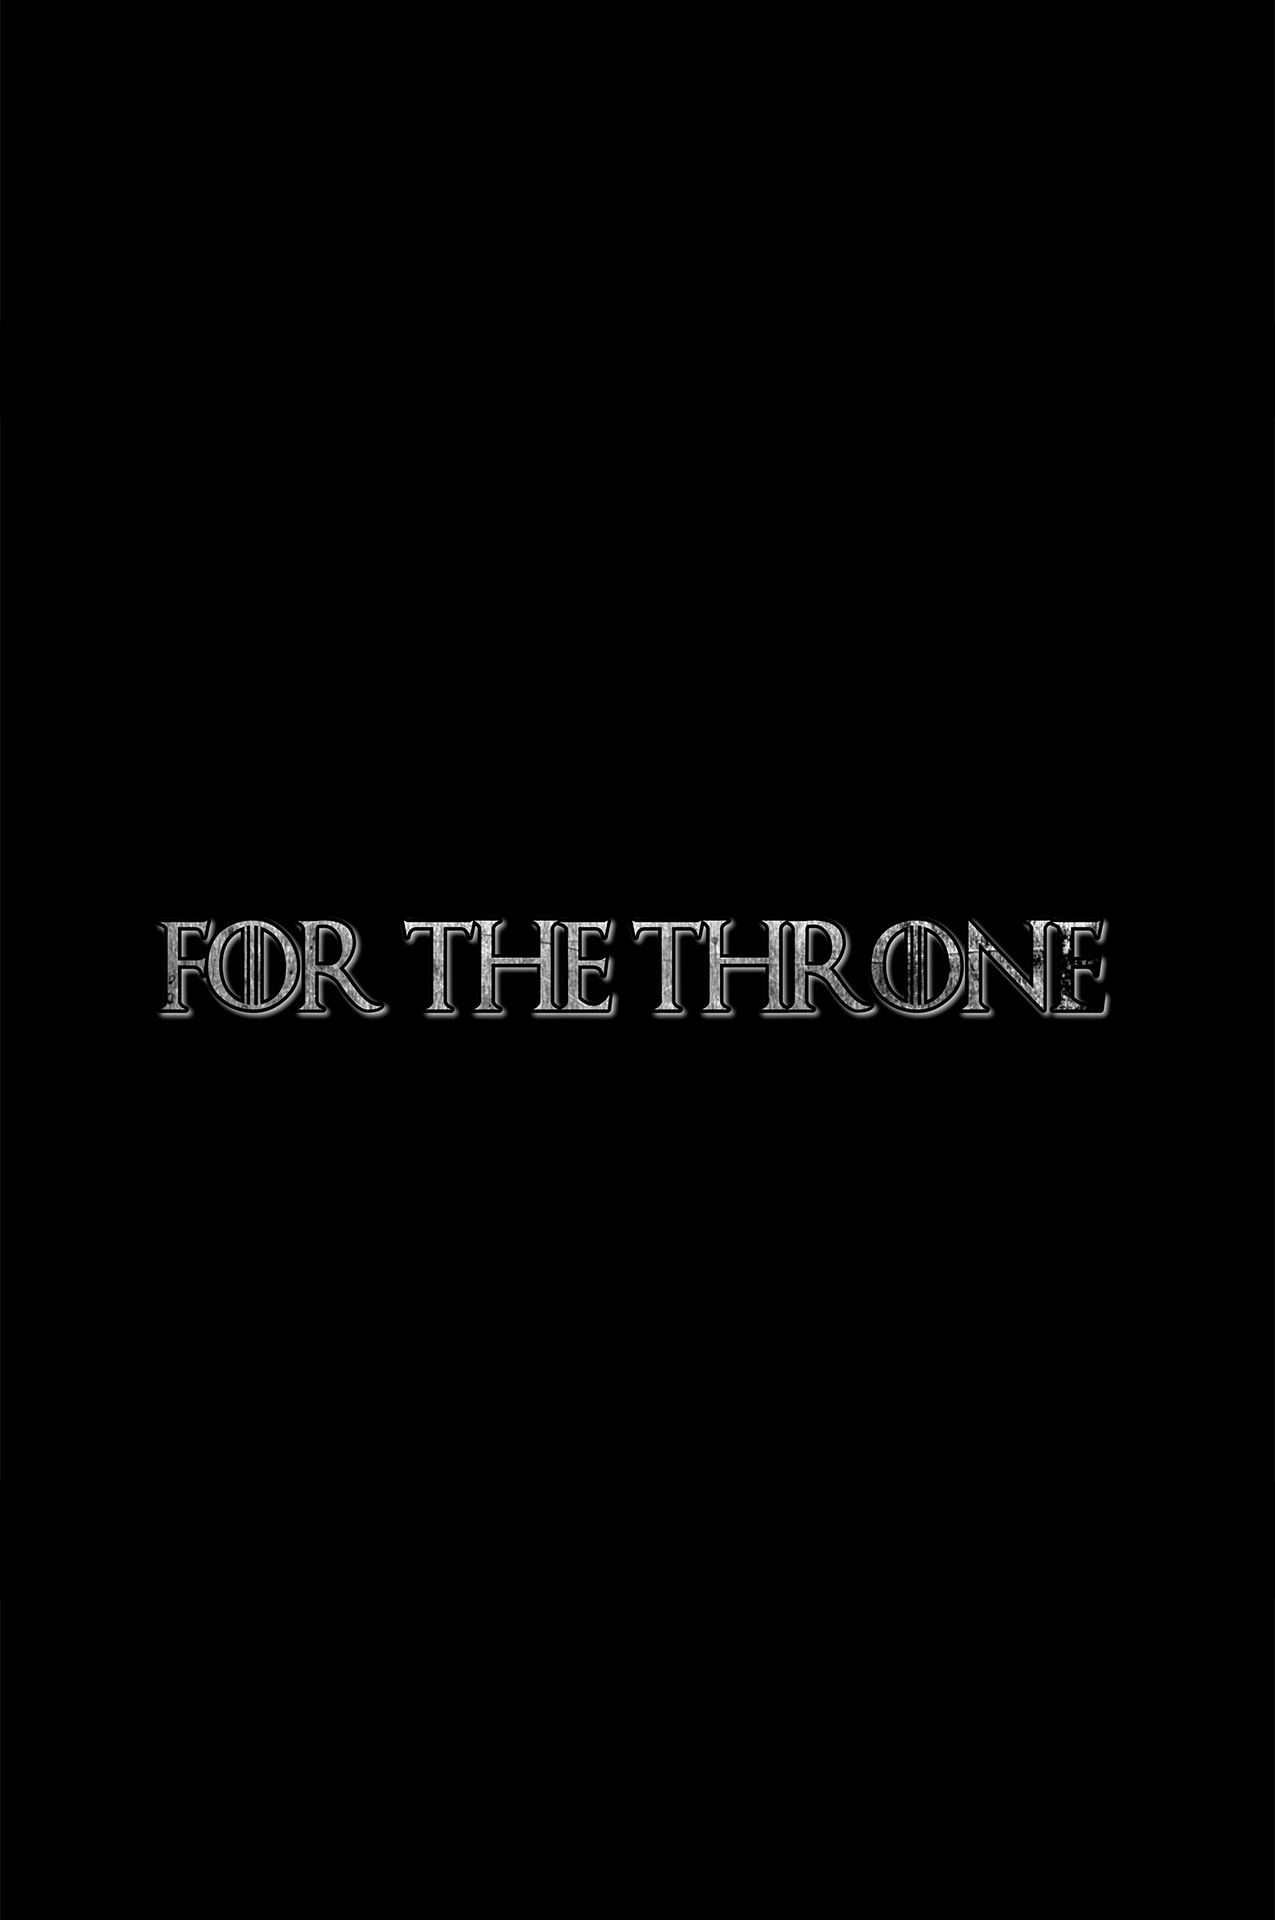 For the Throne